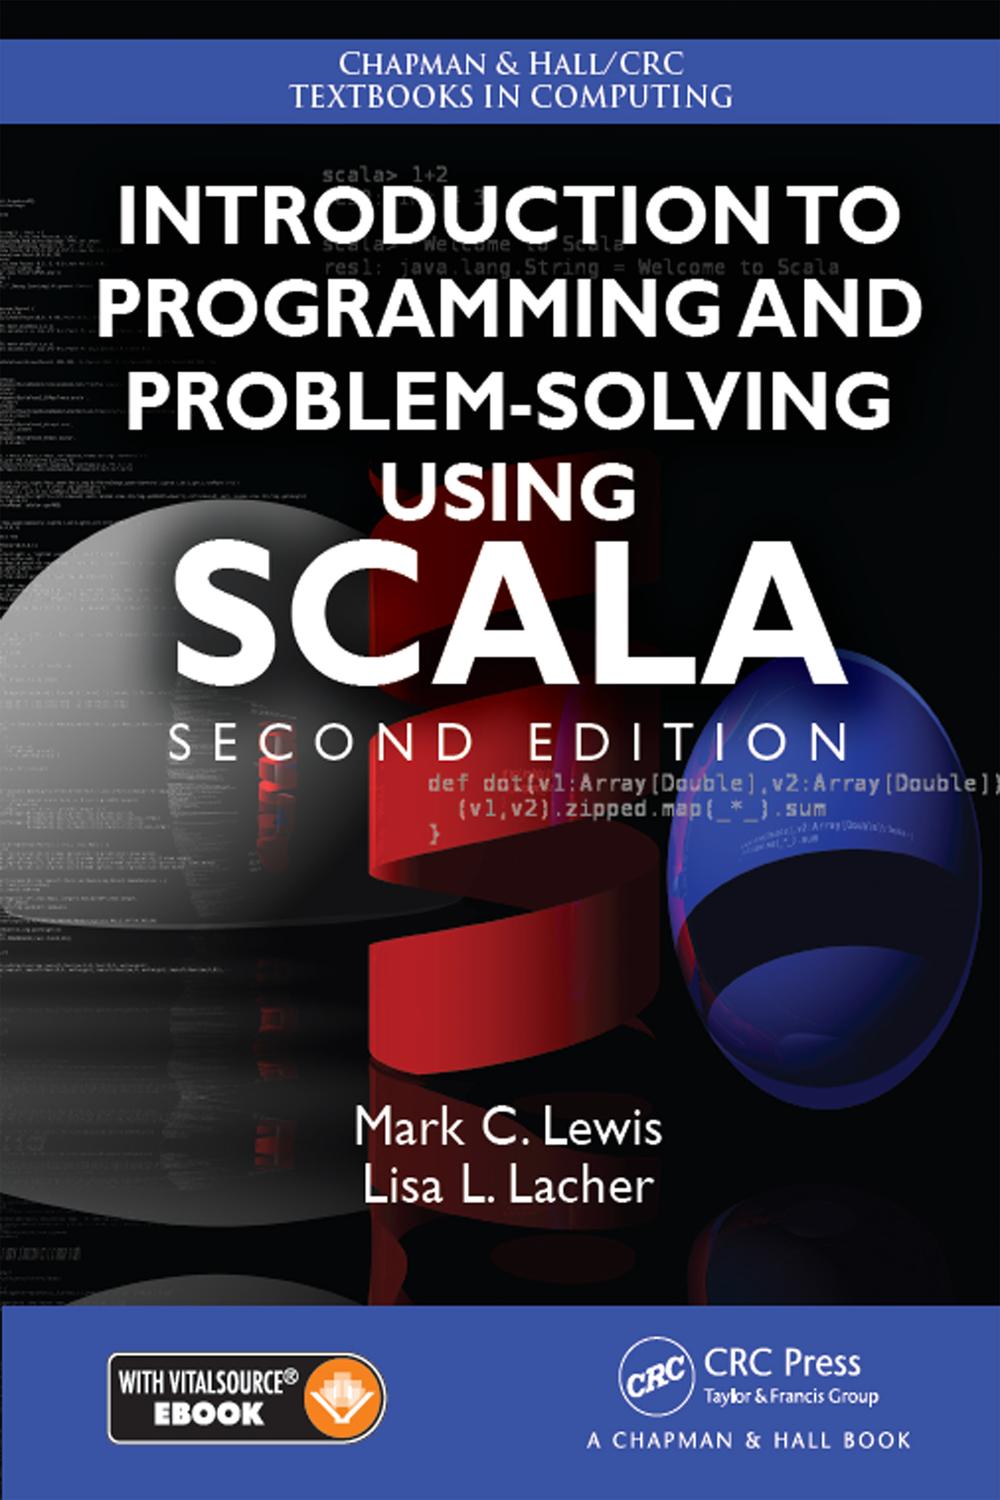 Introduction to Programming and Problem-Solving Using Scala - Mark C. Lewis, Lisa Lacher